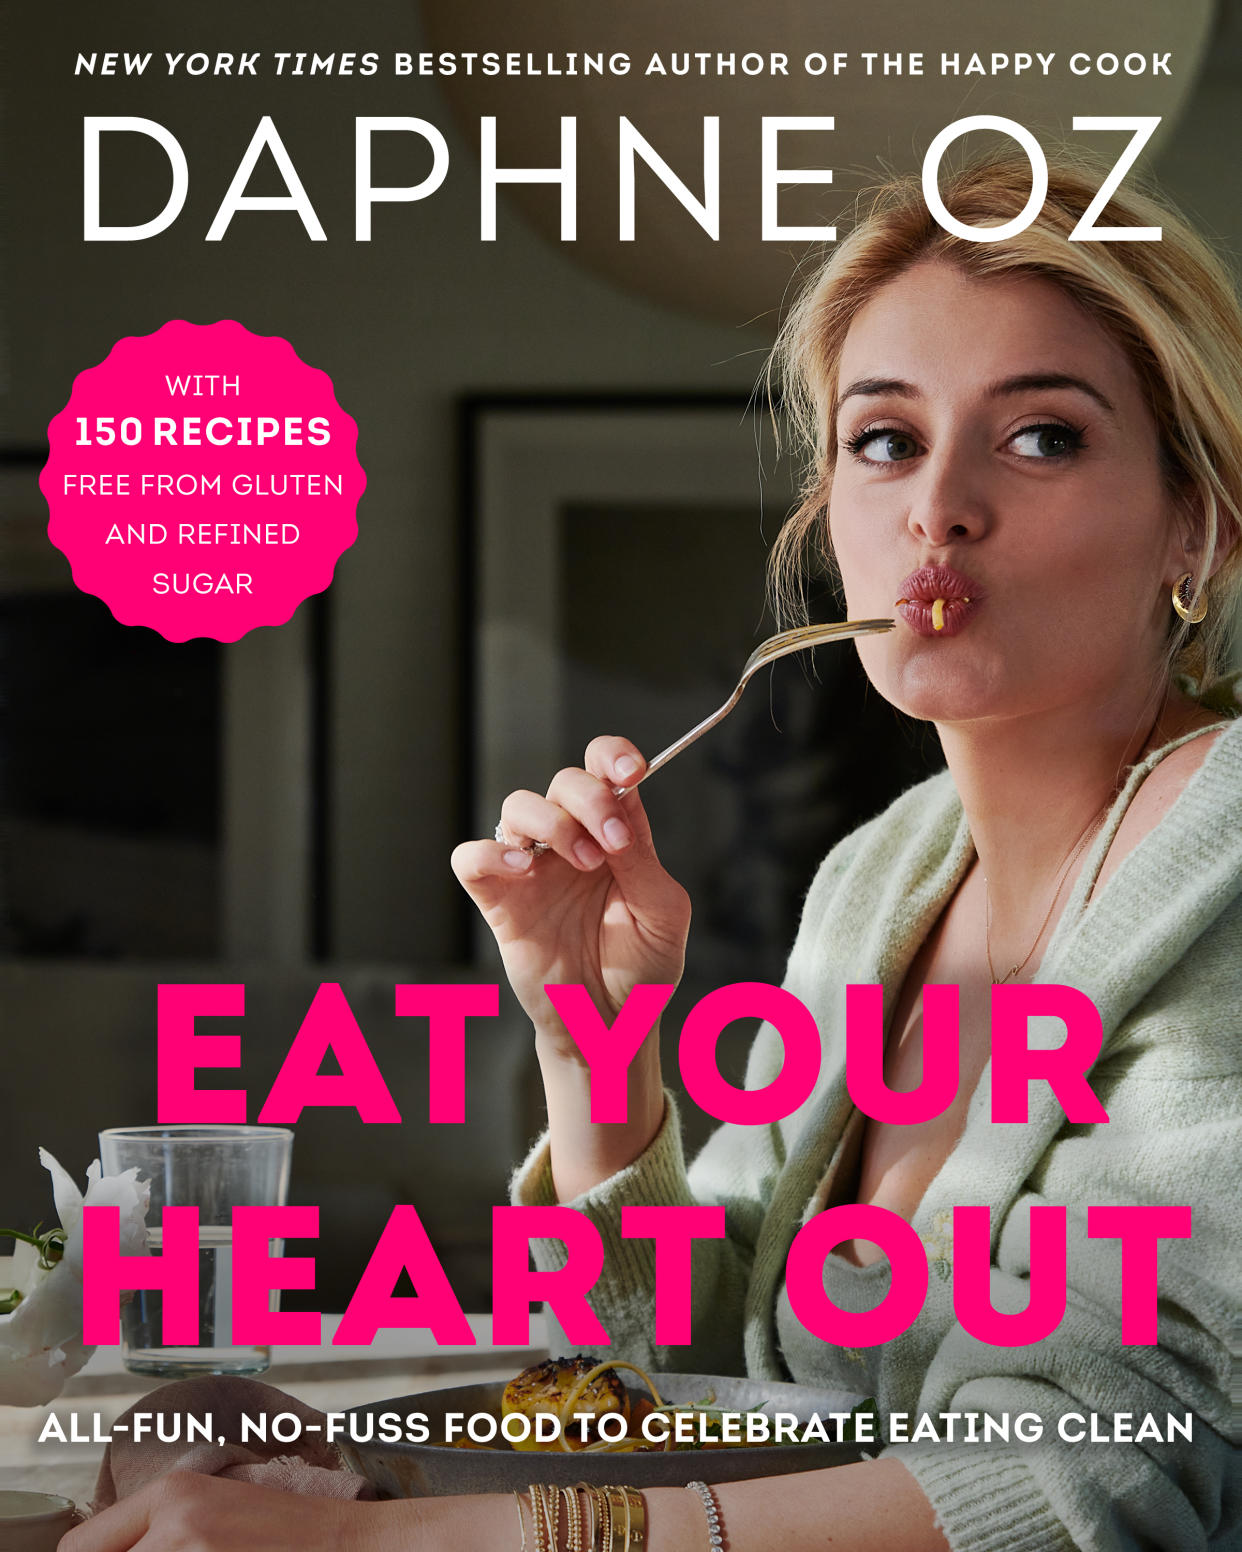 Oz's latest cookbook features recipes free of gluten and refined sugar. (Photo: Daphne Oz)